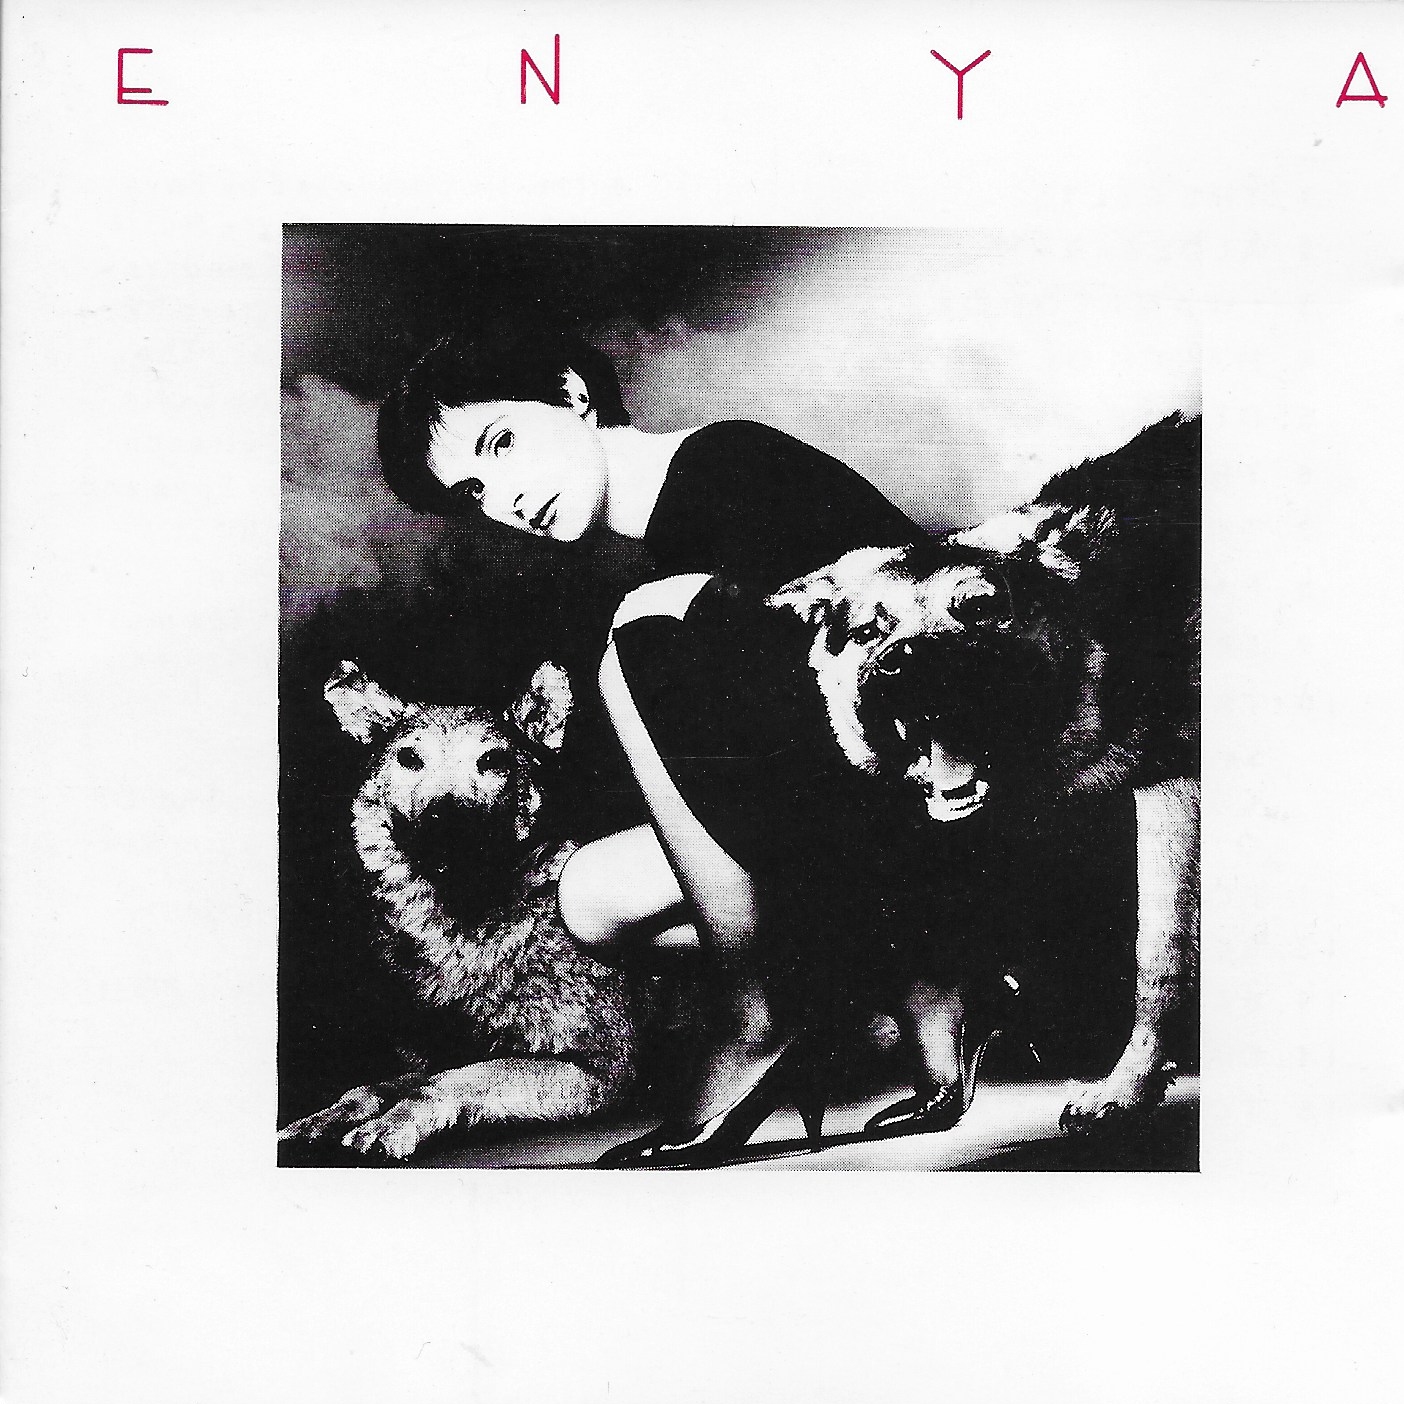 Picture of BBCCD605 The Celts by artist Enya from the BBC cds - Records and Tapes library